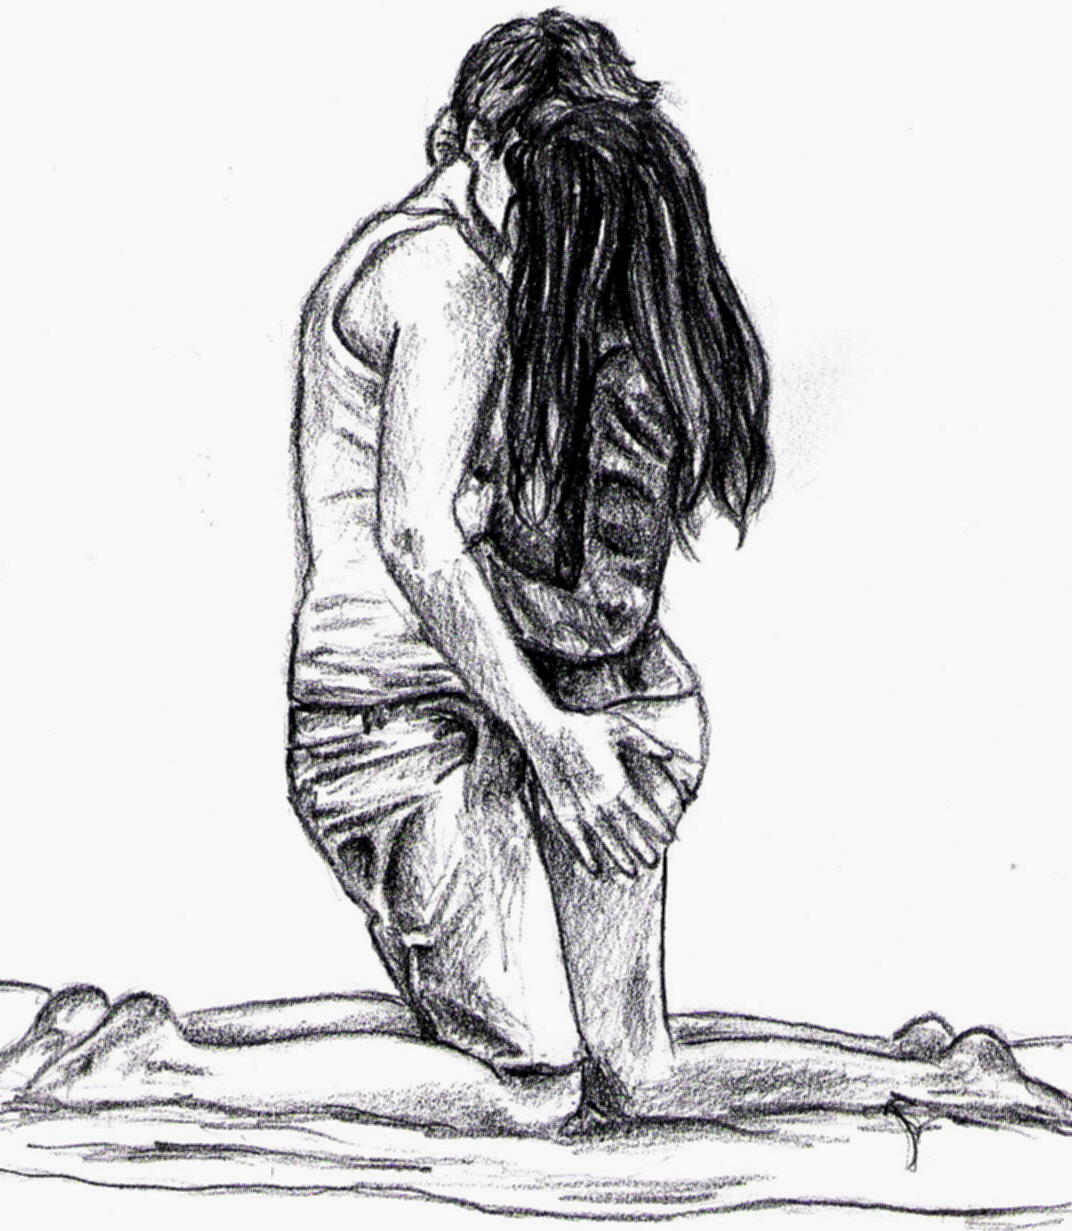 1072x1231 Easy Pencil Sketches Couple On Tumblr Drawings Of Couples Tumblr ...